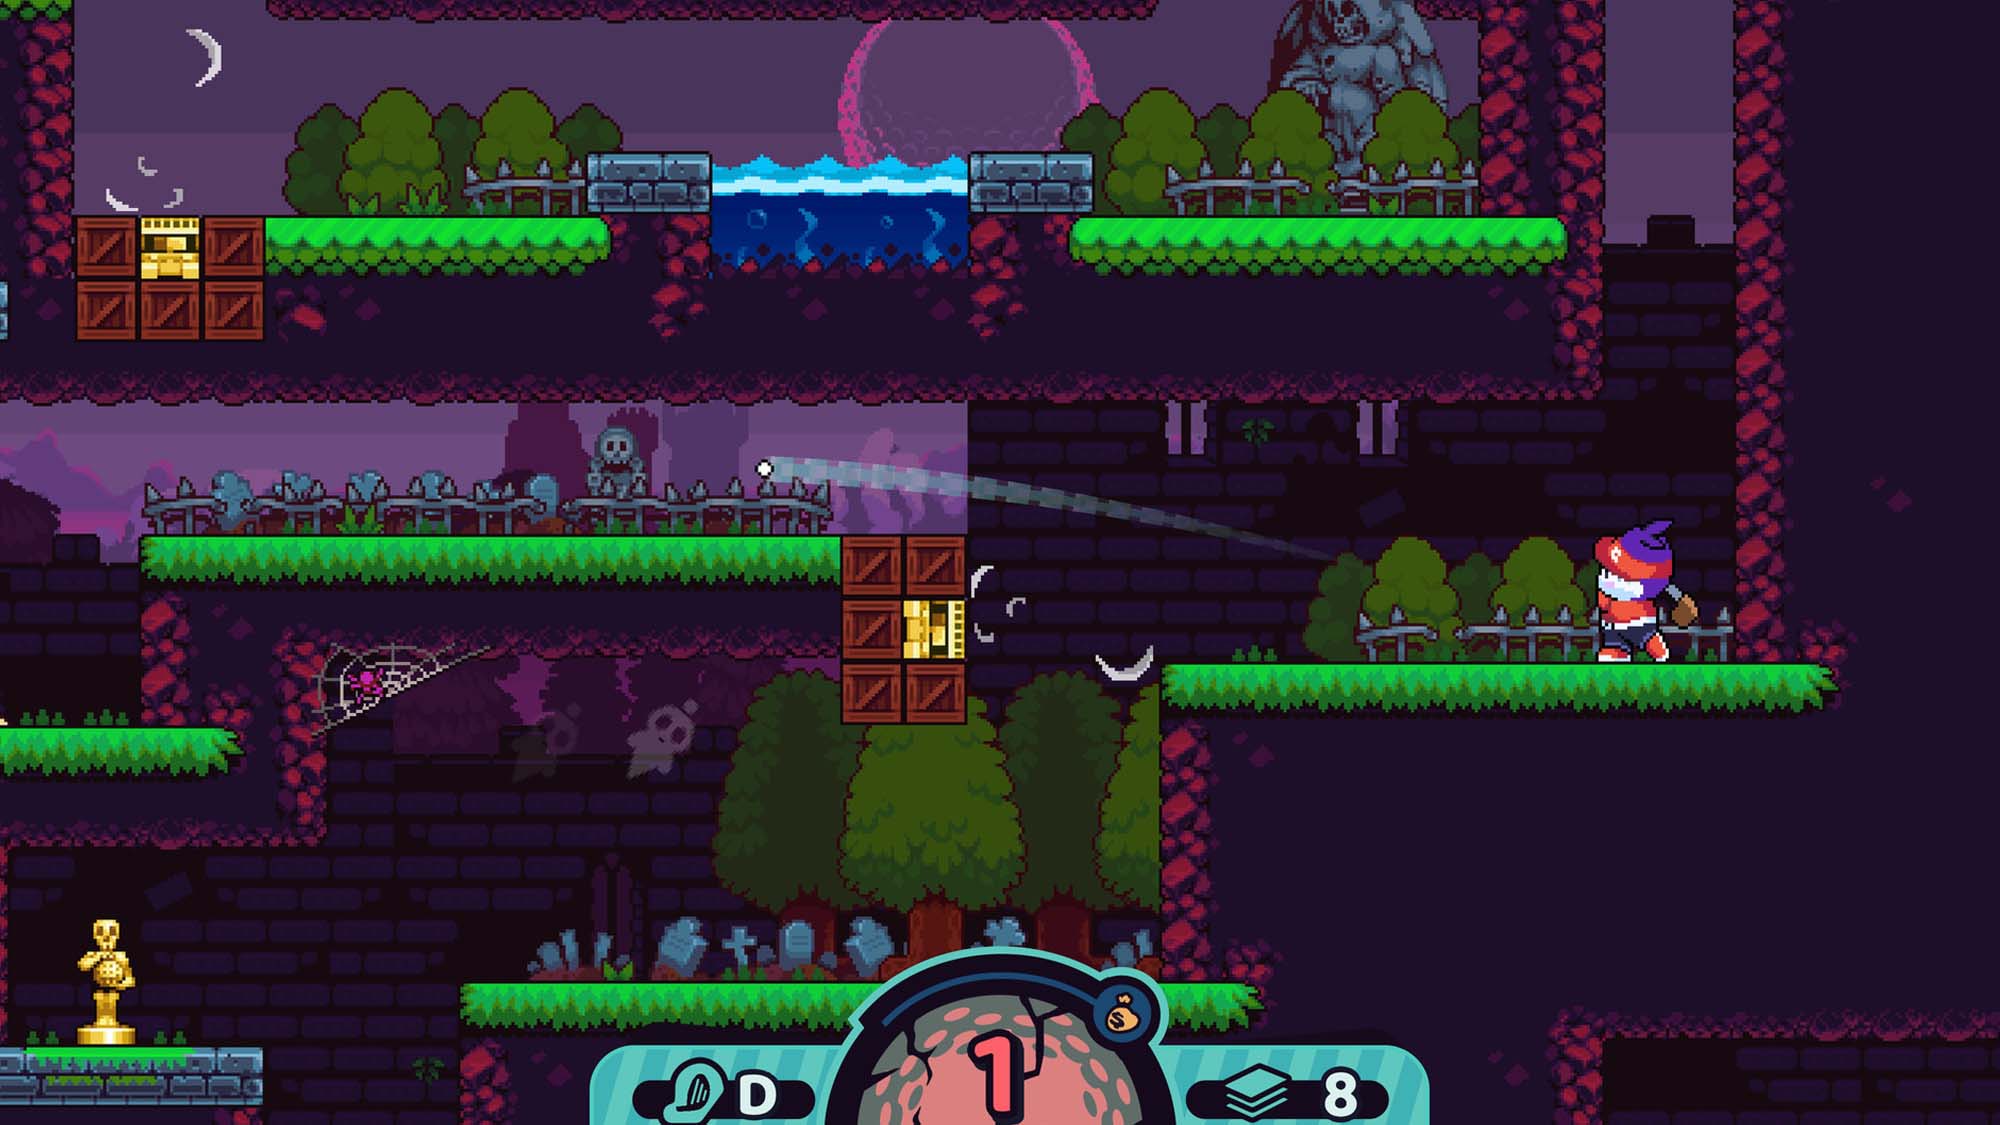 A player taking aim in Cursed to Golf